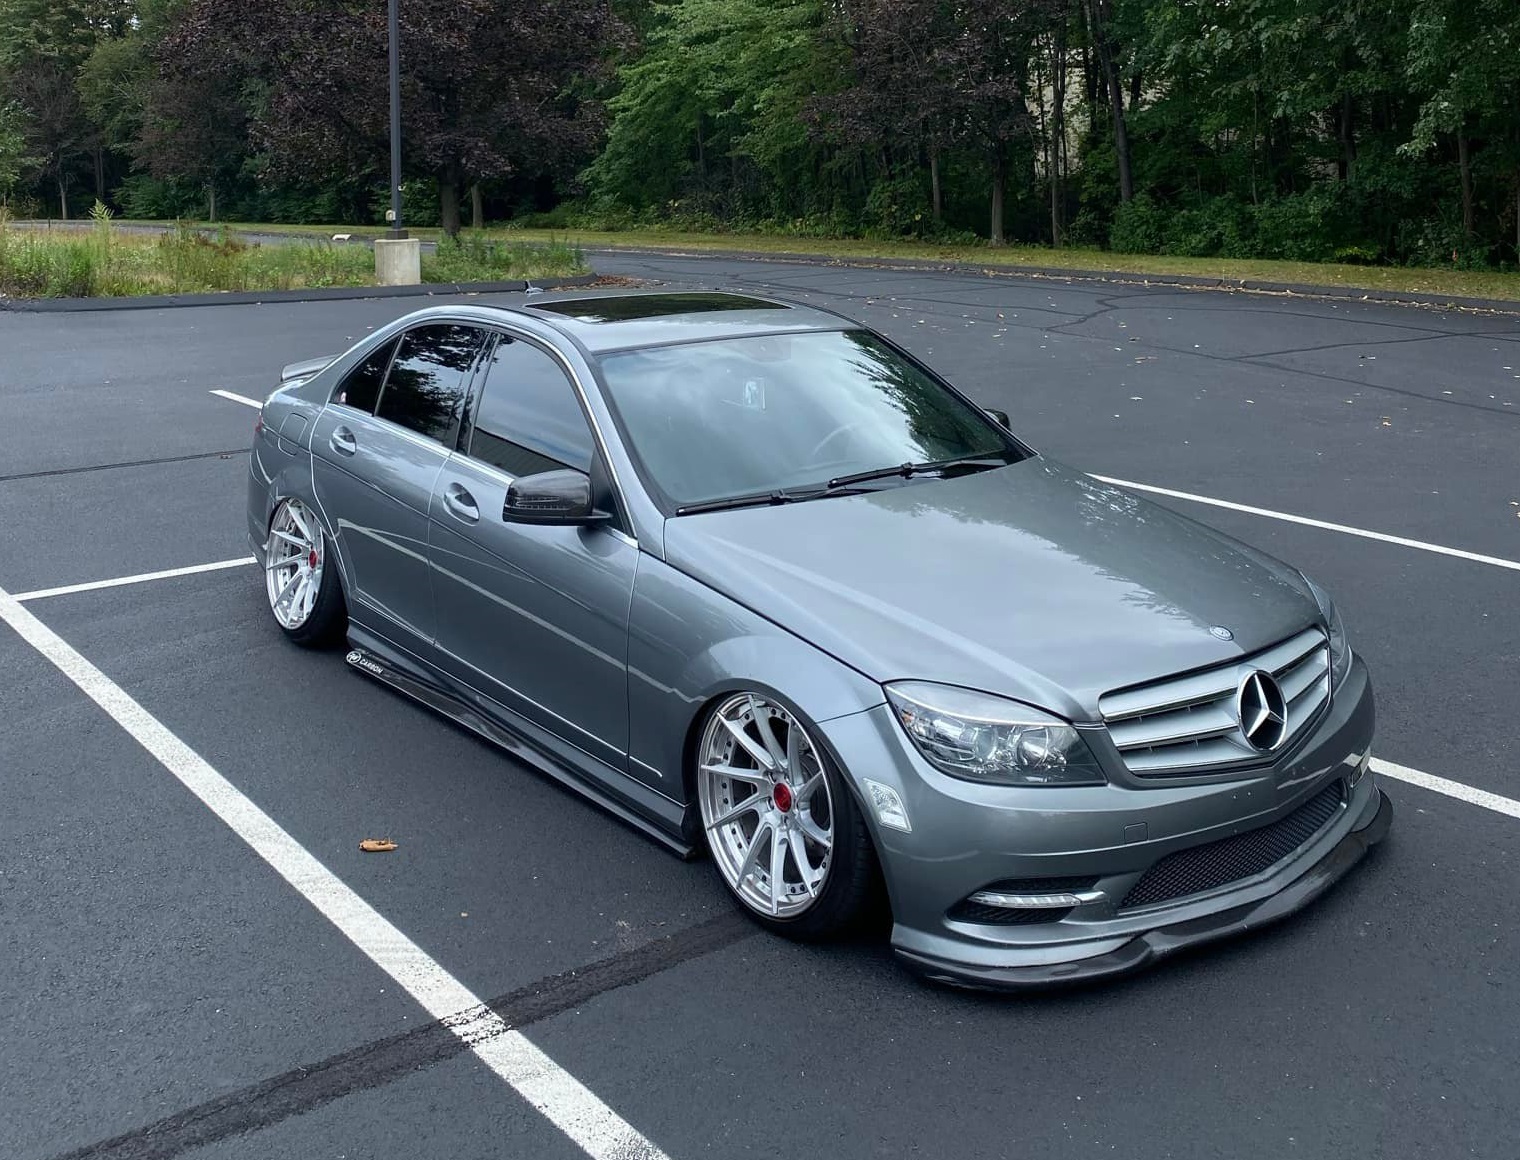 W204 MB on BC forged wheels